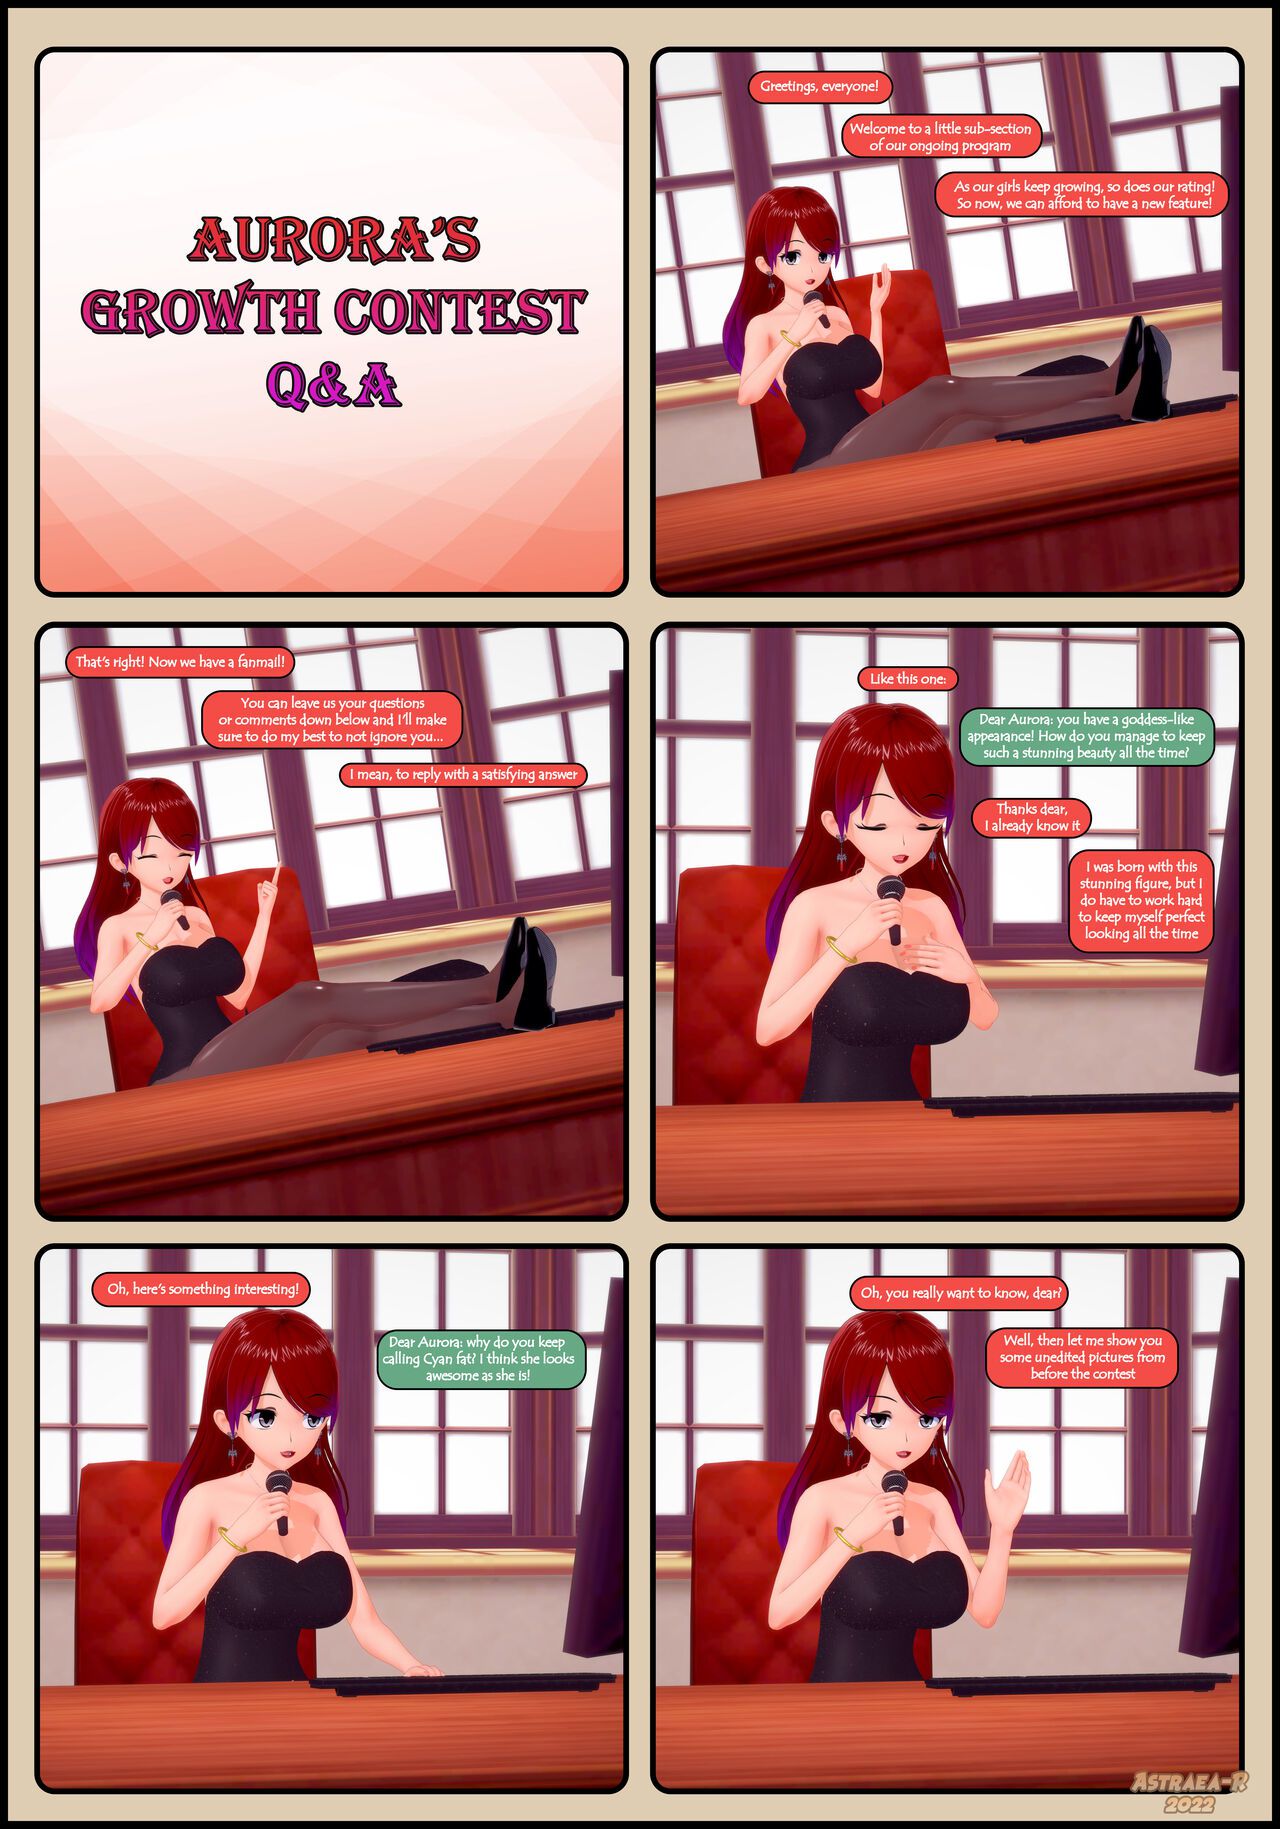 [Astraea-R] Aurora's Growth Contest (Ongoing) 93